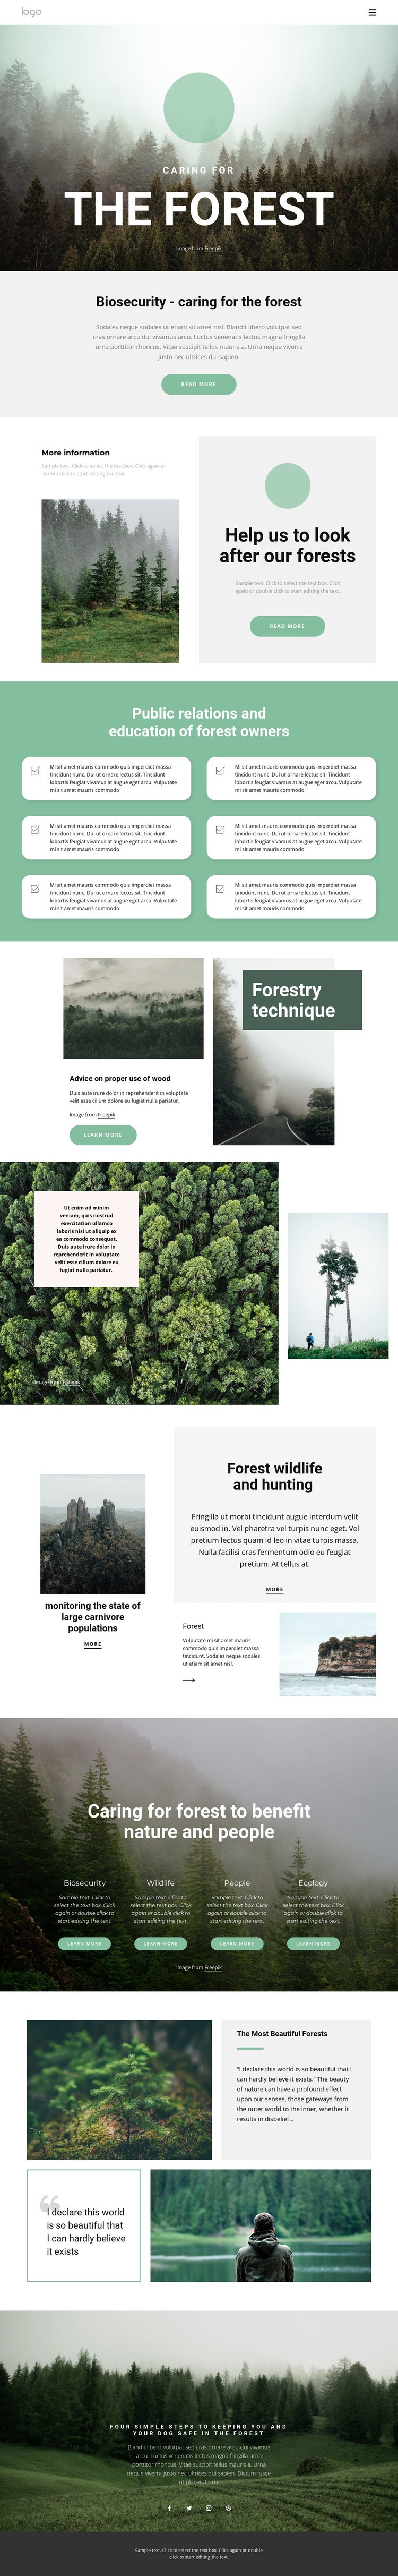 Caring for parks and forests Web Page Design